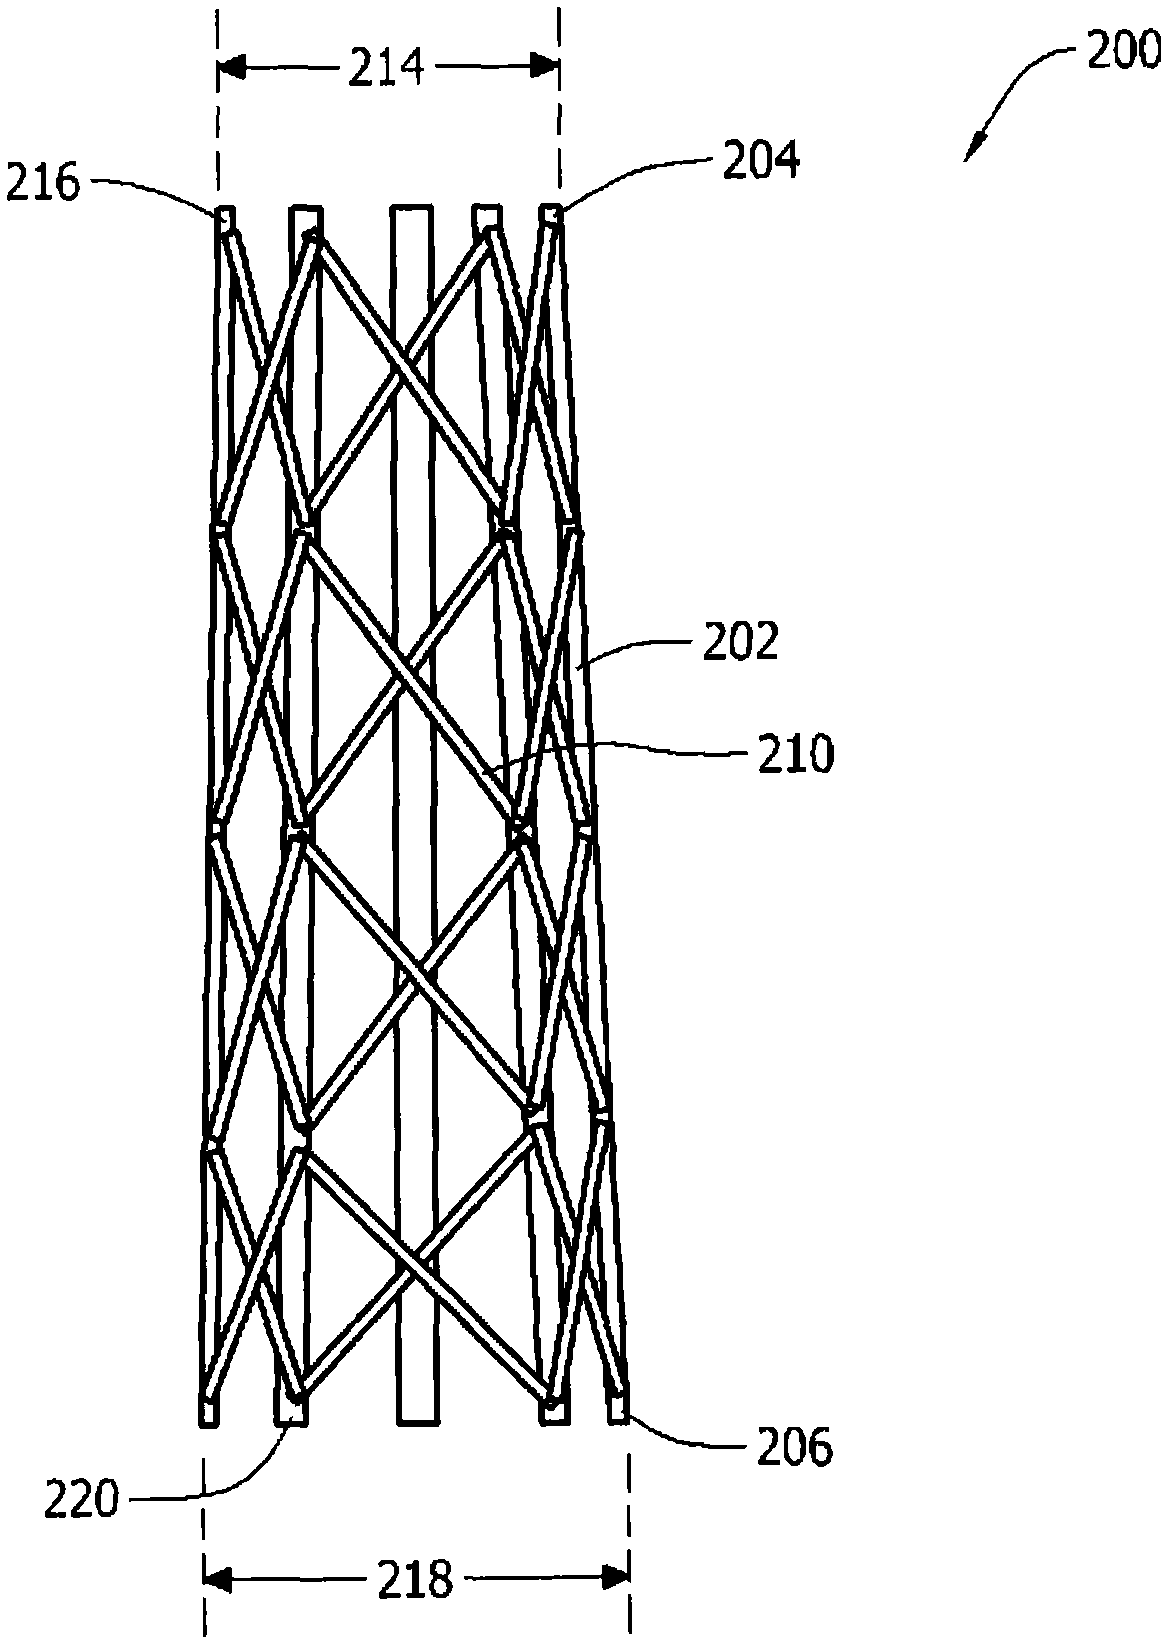 Systems and method of assembling a tower section